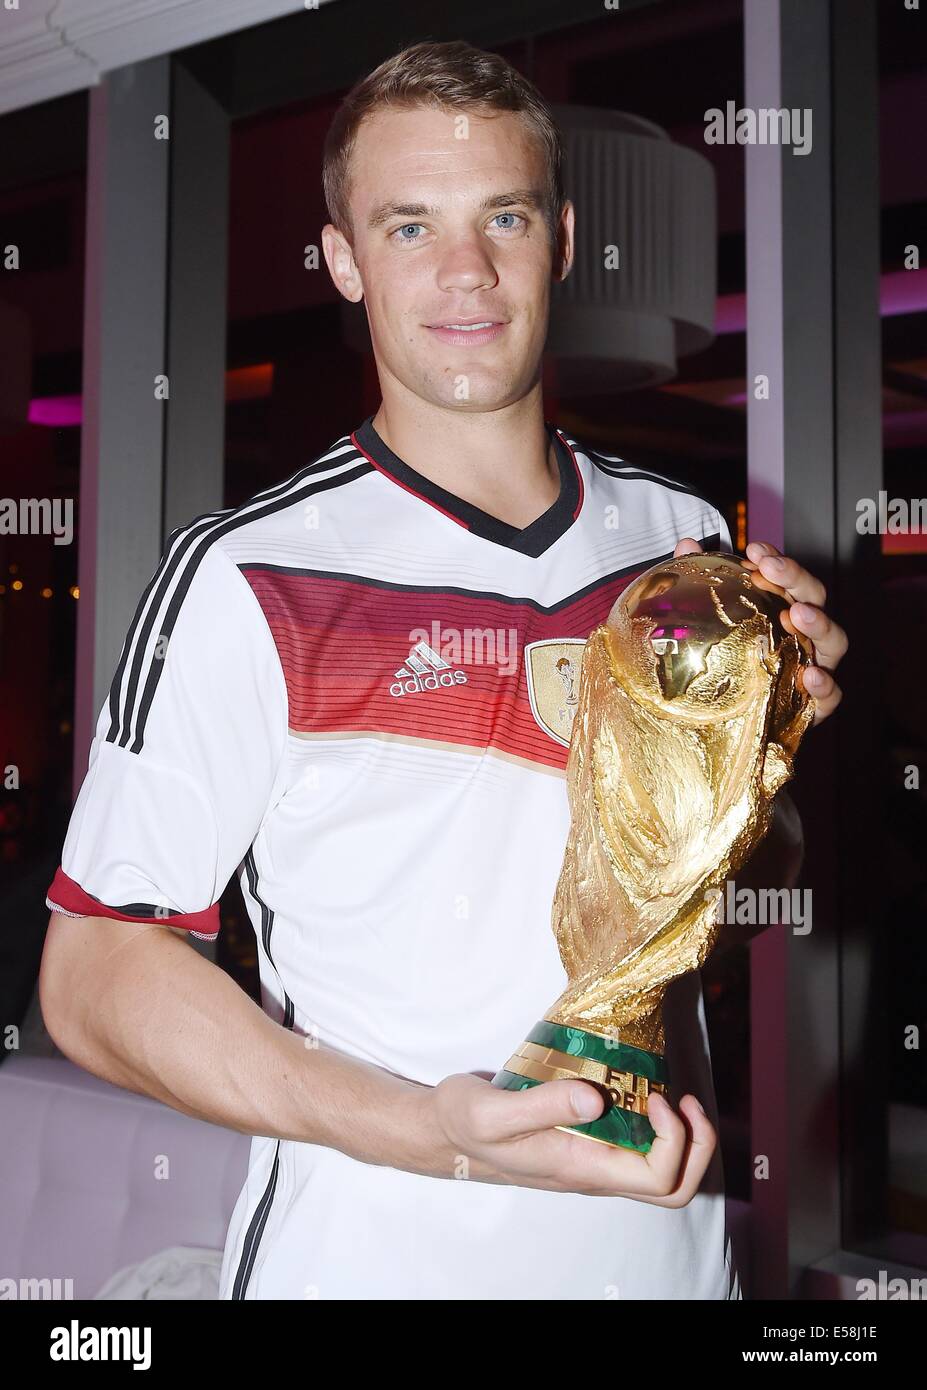 Rio de Janeiro, Brazil. 13th July, 2014. Goetz (Ger) celebrating victory in the FIFA World Cup with the trophy at Hotel Sheraton in Rio De Janeiro, Brazil on 13 July 2014. Germany won 1-0 against Argentina in the FIFA World Cup 2014 Final match. © Action Plus Sports/Alamy Live News Stock Photo